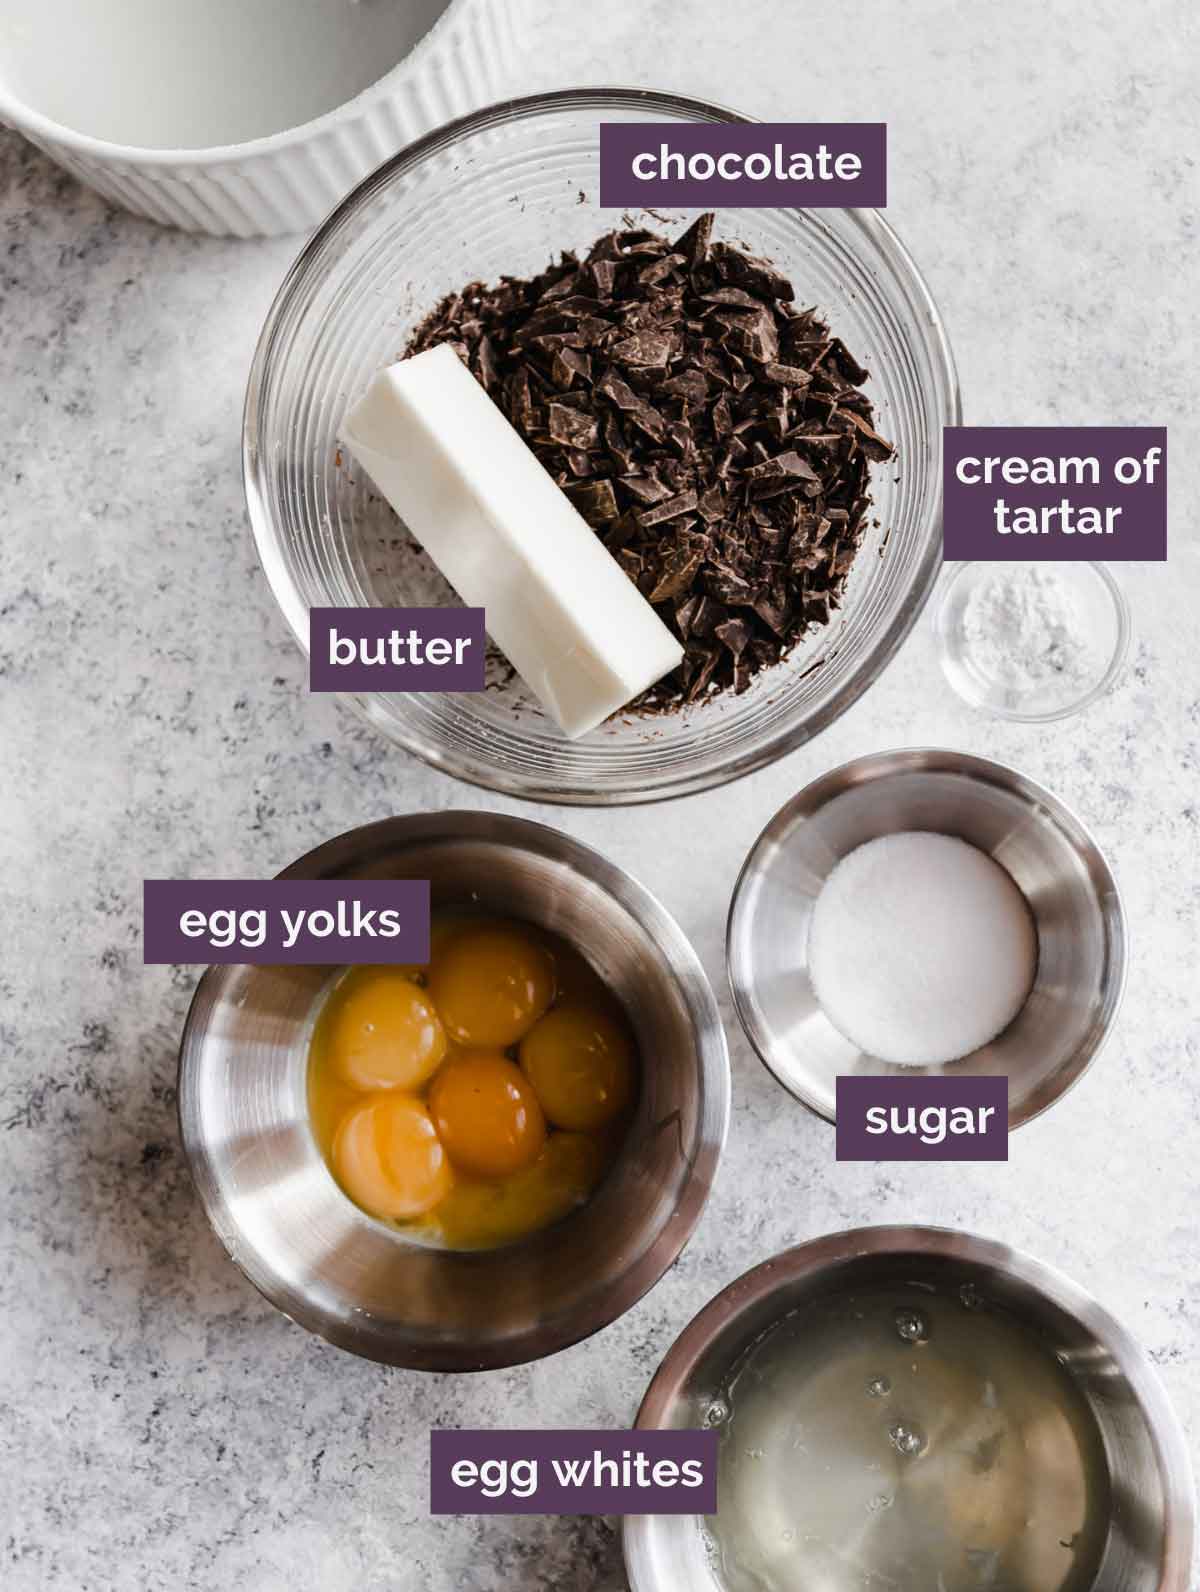 Ingredients for chocolate souffle prepped and labeled.